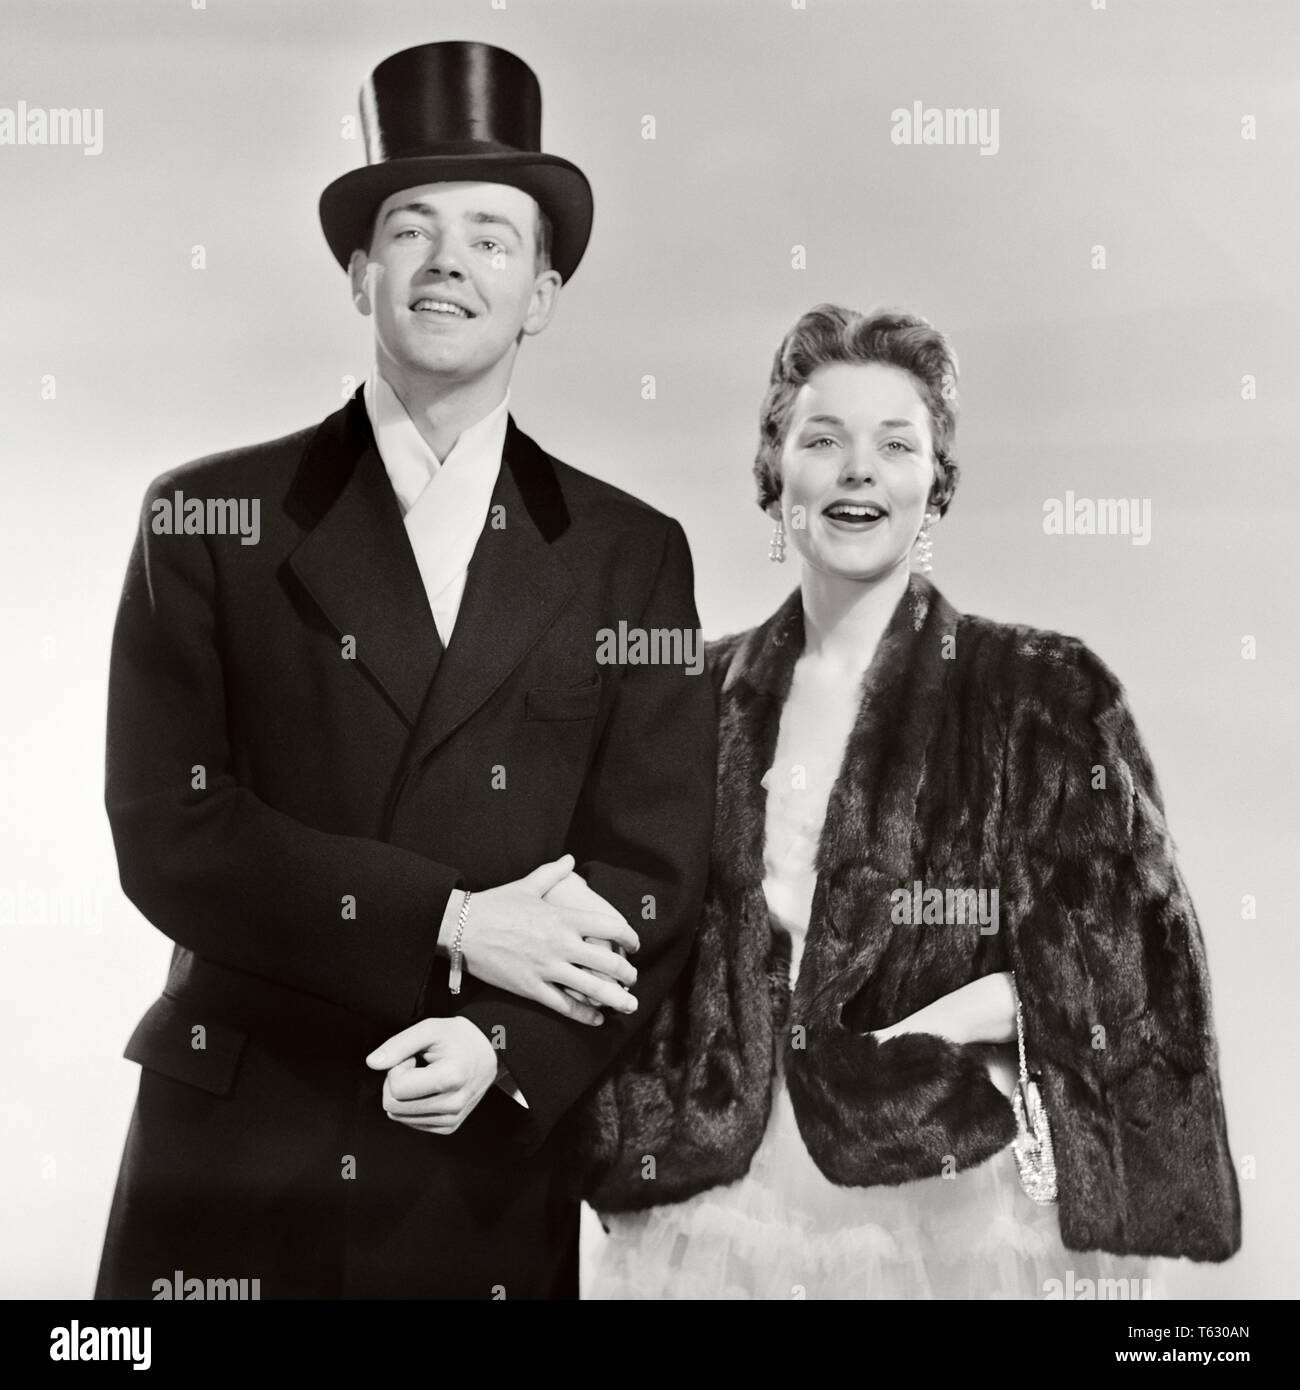 1950s MAN WOMAN ARM IN ARM DRESSED IN FORMAL CLOTHES MAN WEARING TOP HAT WOMAN FUR STOLE LOOKING AT CAMERA SMILING - r860 DEB001 HARS NOSTALGIA SILK OLD FASHION 1 GREETING FACIAL STYLE PLEASED JOY LIFESTYLE CELEBRATION FEMALES STUDIO SHOT COPY SPACE FRIENDSHIP HALF-LENGTH LADIES PERSONS MALES EXPRESSIONS B&W EYE CONTACT HAPPINESS CHEERFUL LEISURE STYLES SOPHISTICATED NIGHT ON THE TOWN SMILES UPSCALE STOLE COSMOPOLITAN JOYFUL STYLISH ATTIRE DEB001 DRESSED UP EVENING WARE FANCY DRESS FASHIONS MID-ADULT MID-ADULT MAN MID-ADULT WOMAN TOGETHERNESS TOP HAT BLACK AND WHITE CAUCASIAN ETHNICITY Stock Photo